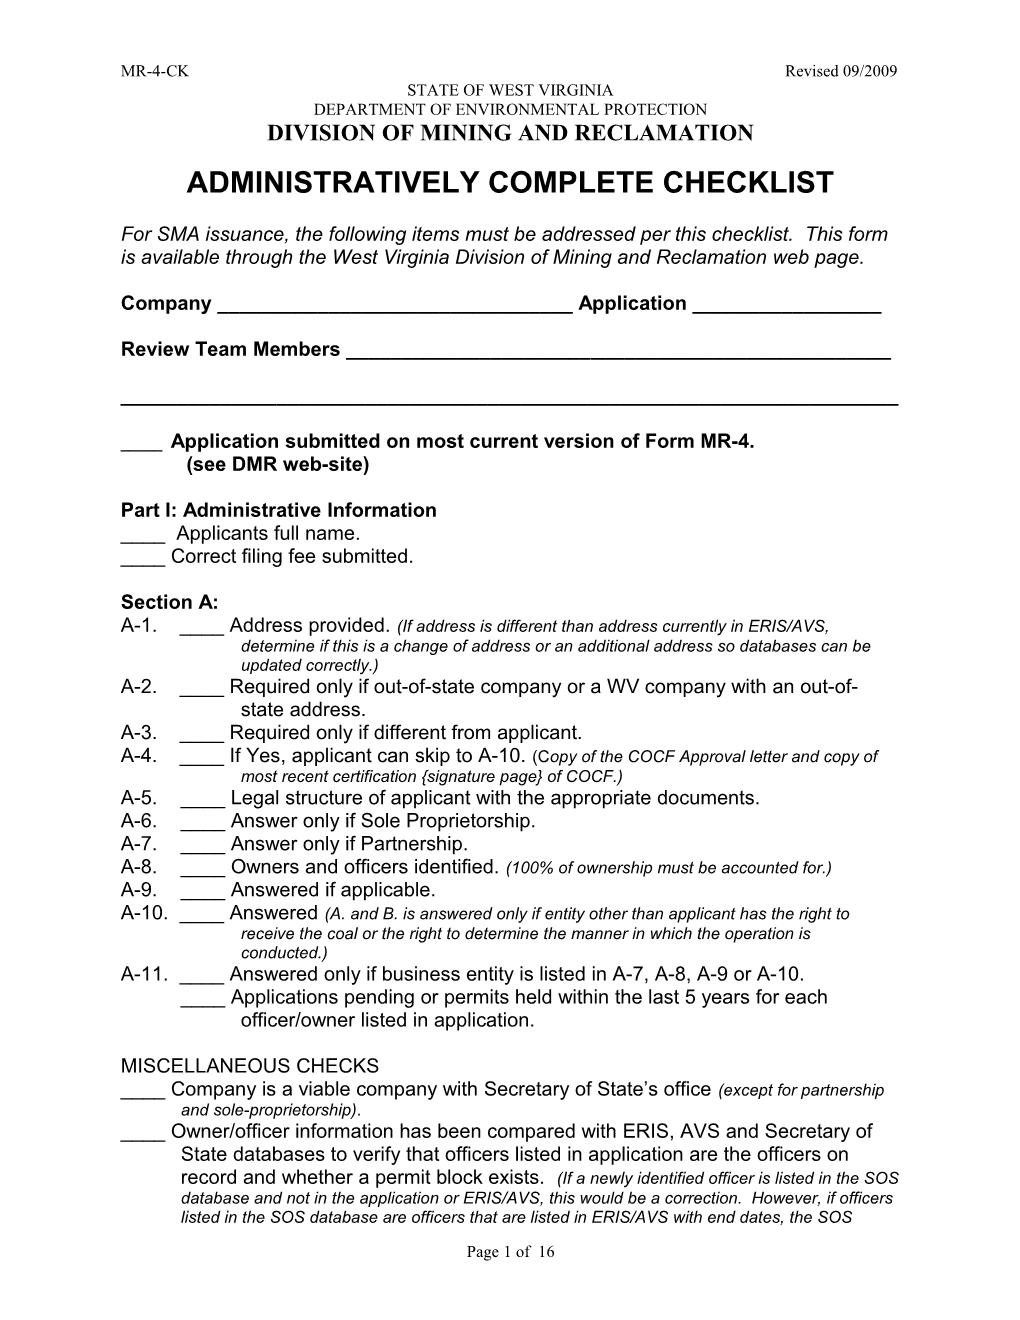 Administratively Complete Checklist